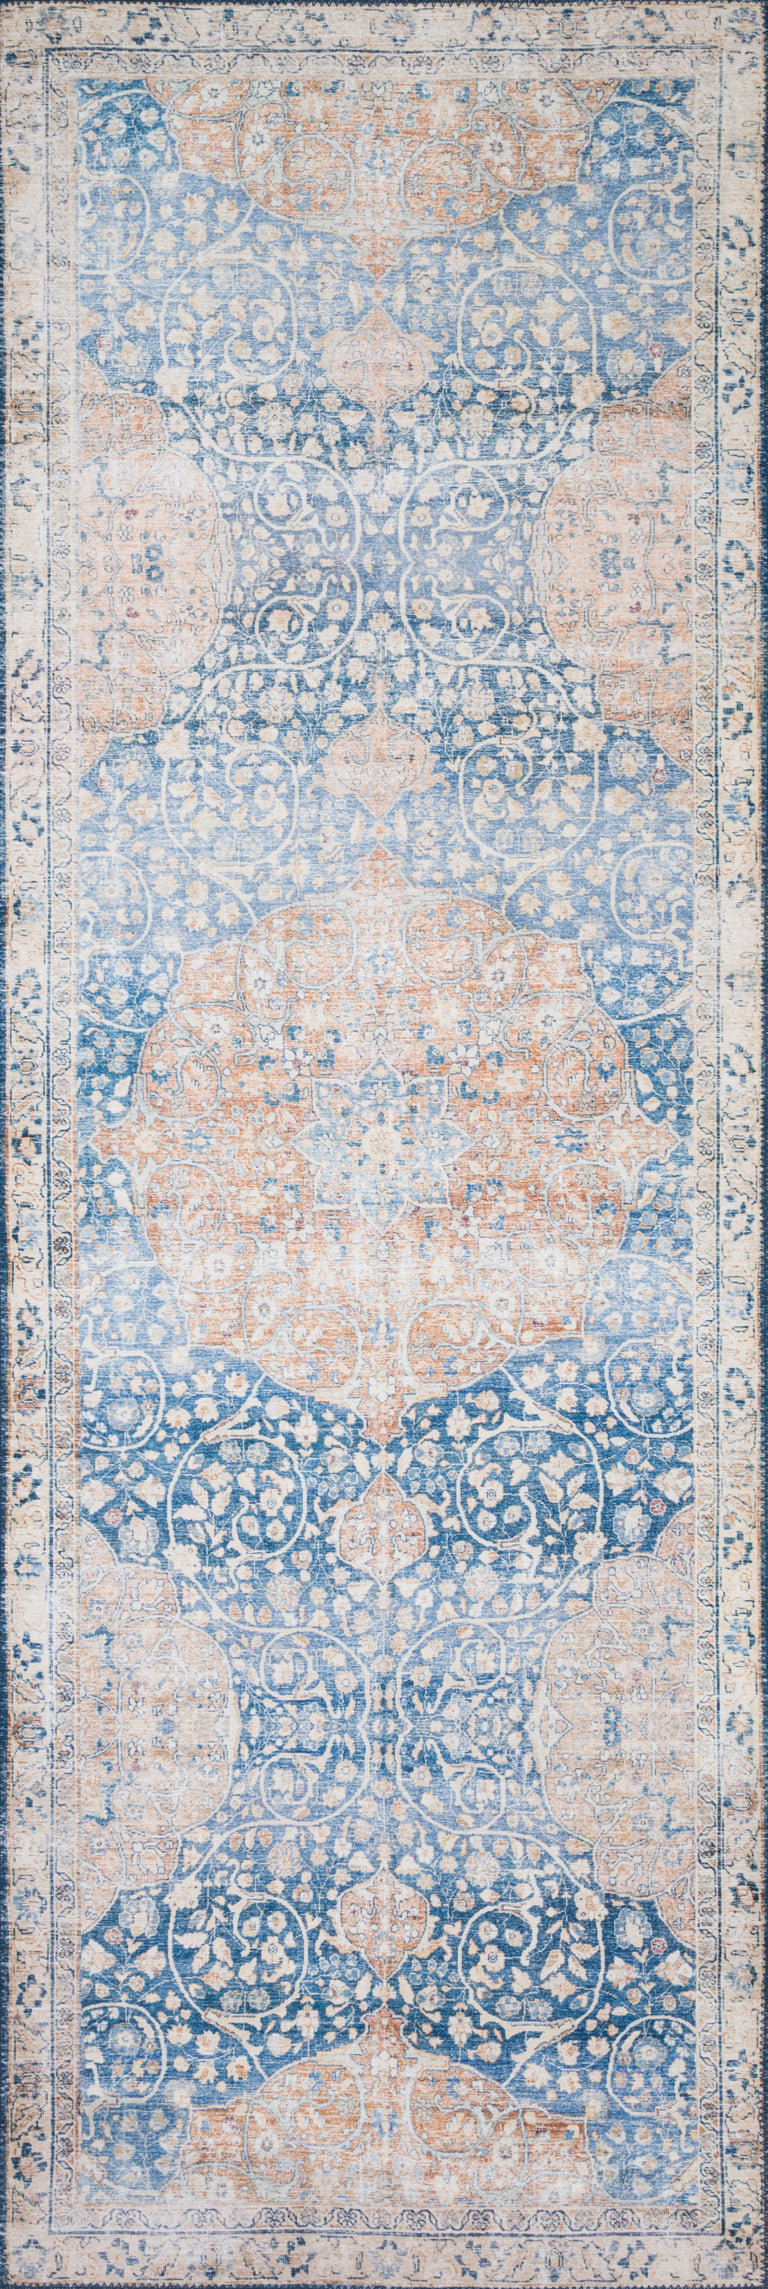 Loloi II Layla Collection Rug in Blue, Tangerine - 3'6" x 5'6"